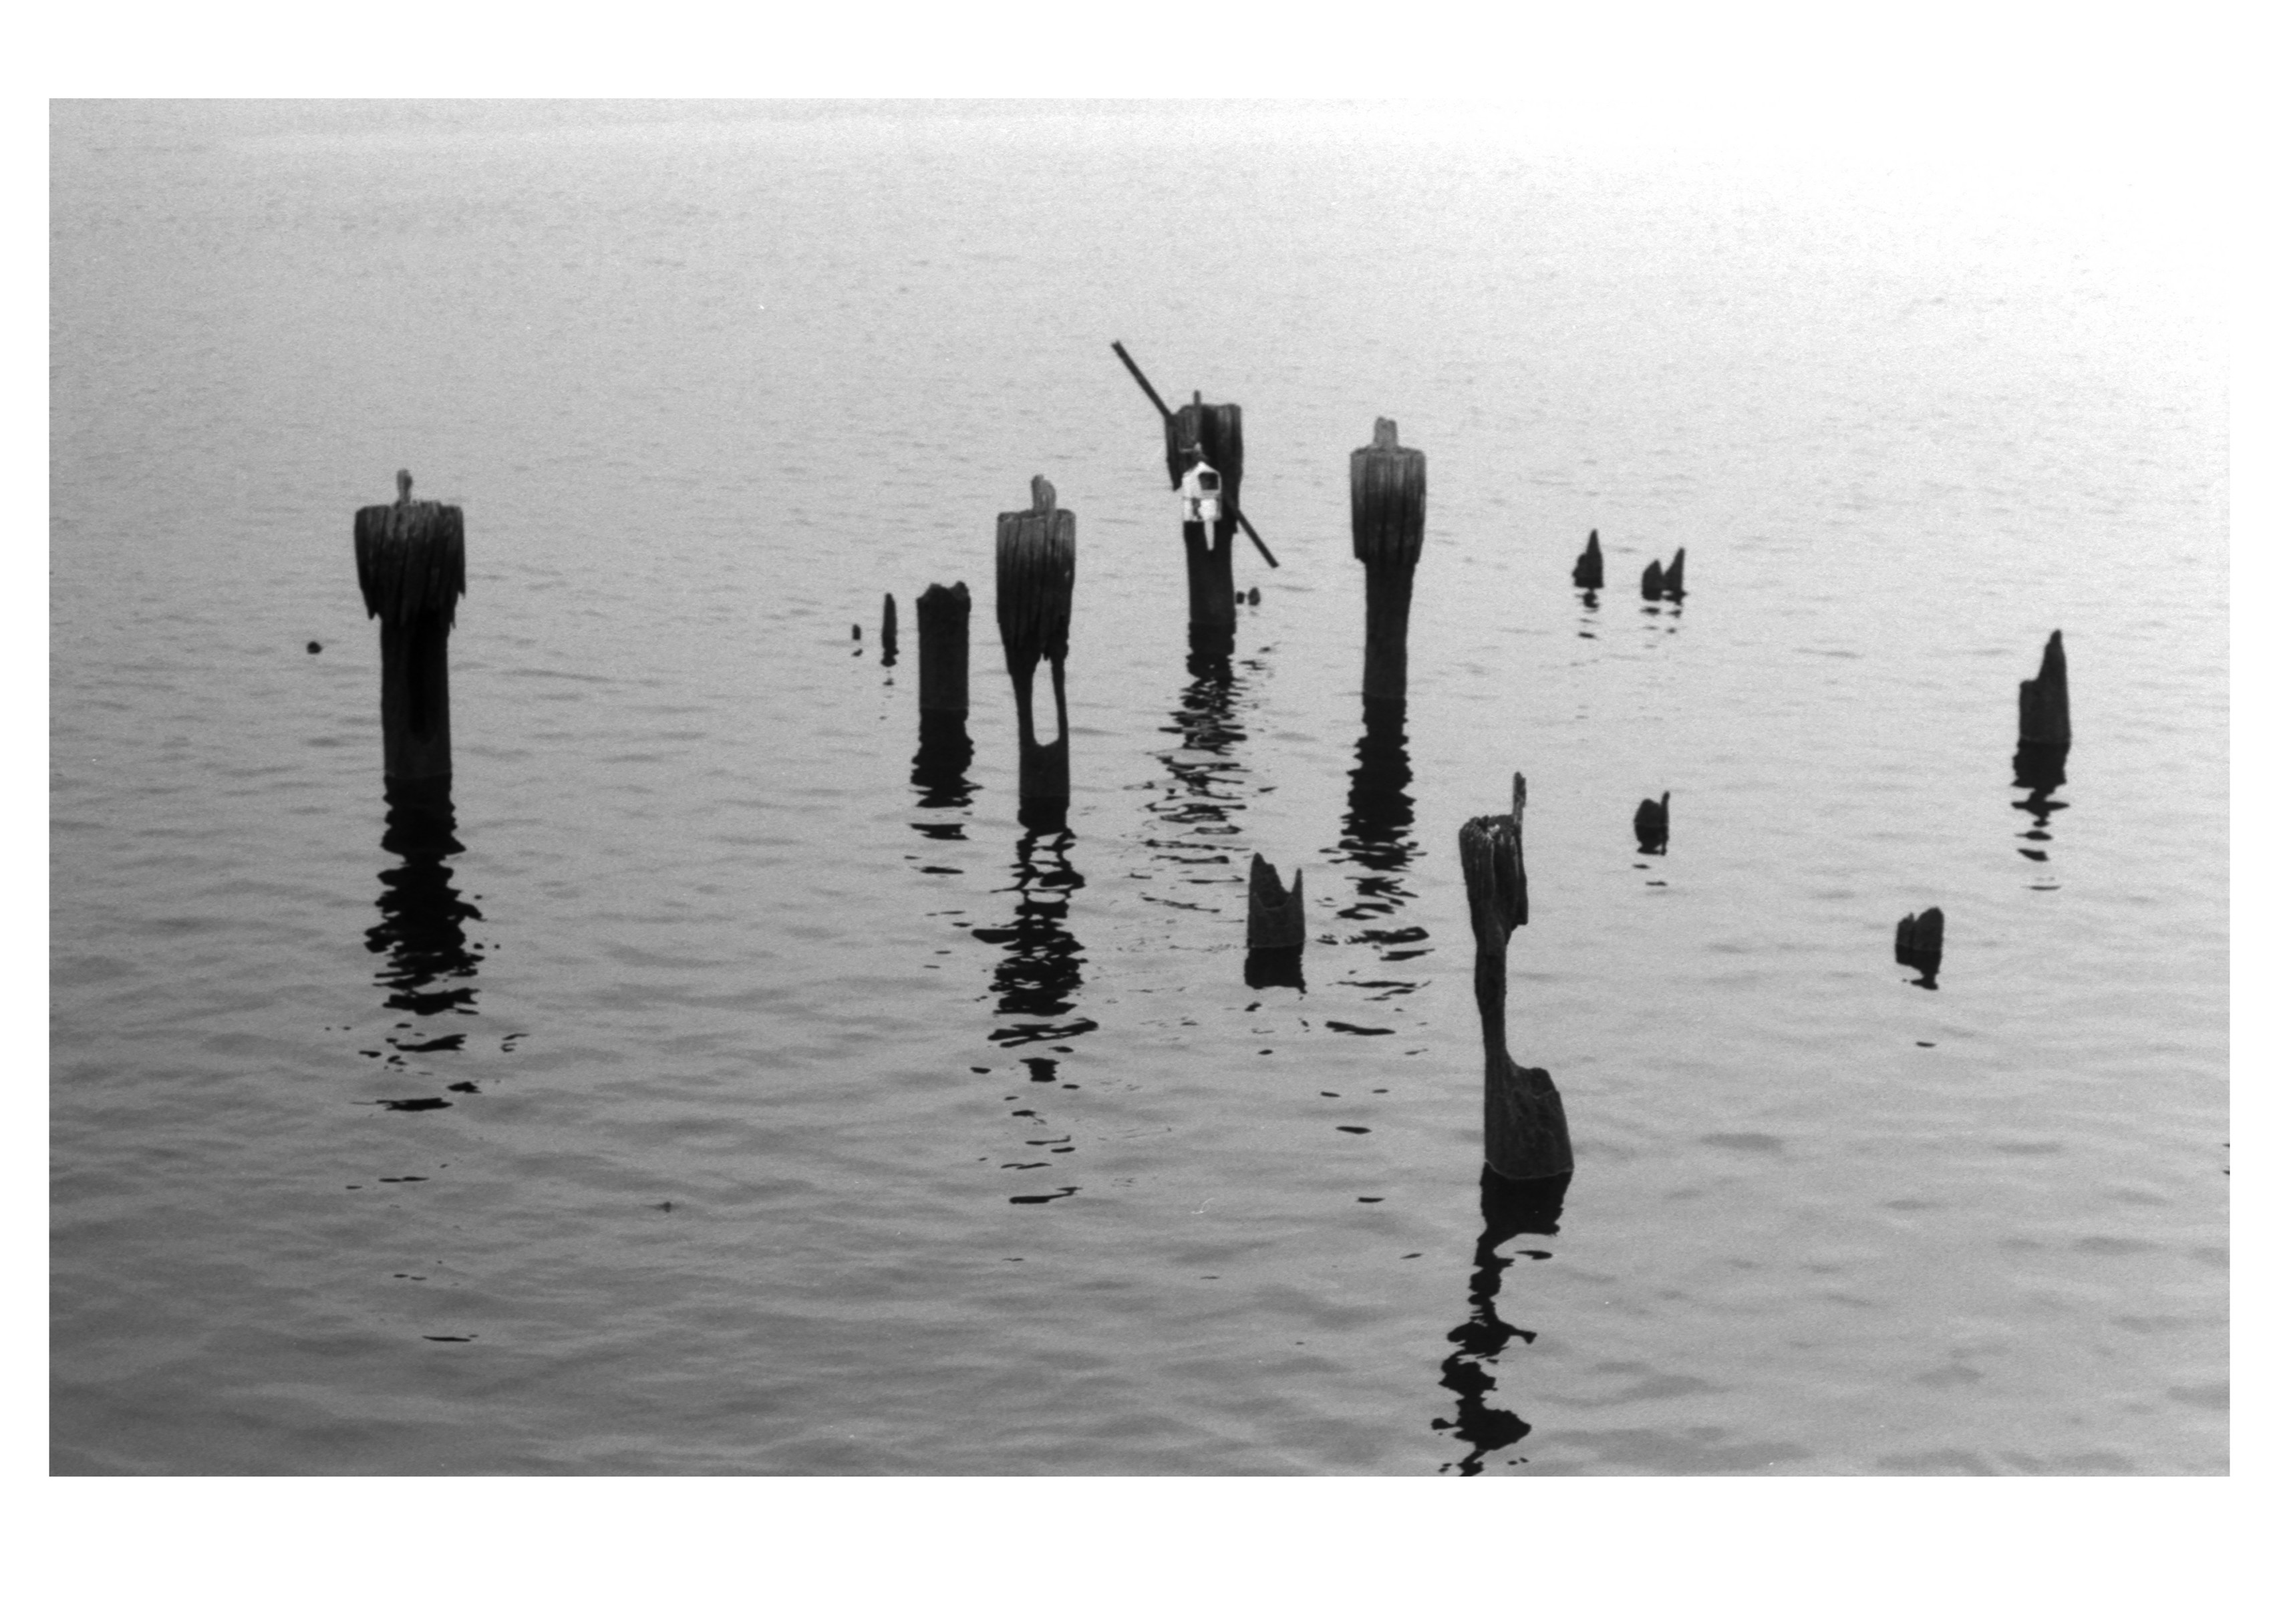 Decaying pilings off of India Point Park in Providence, RI